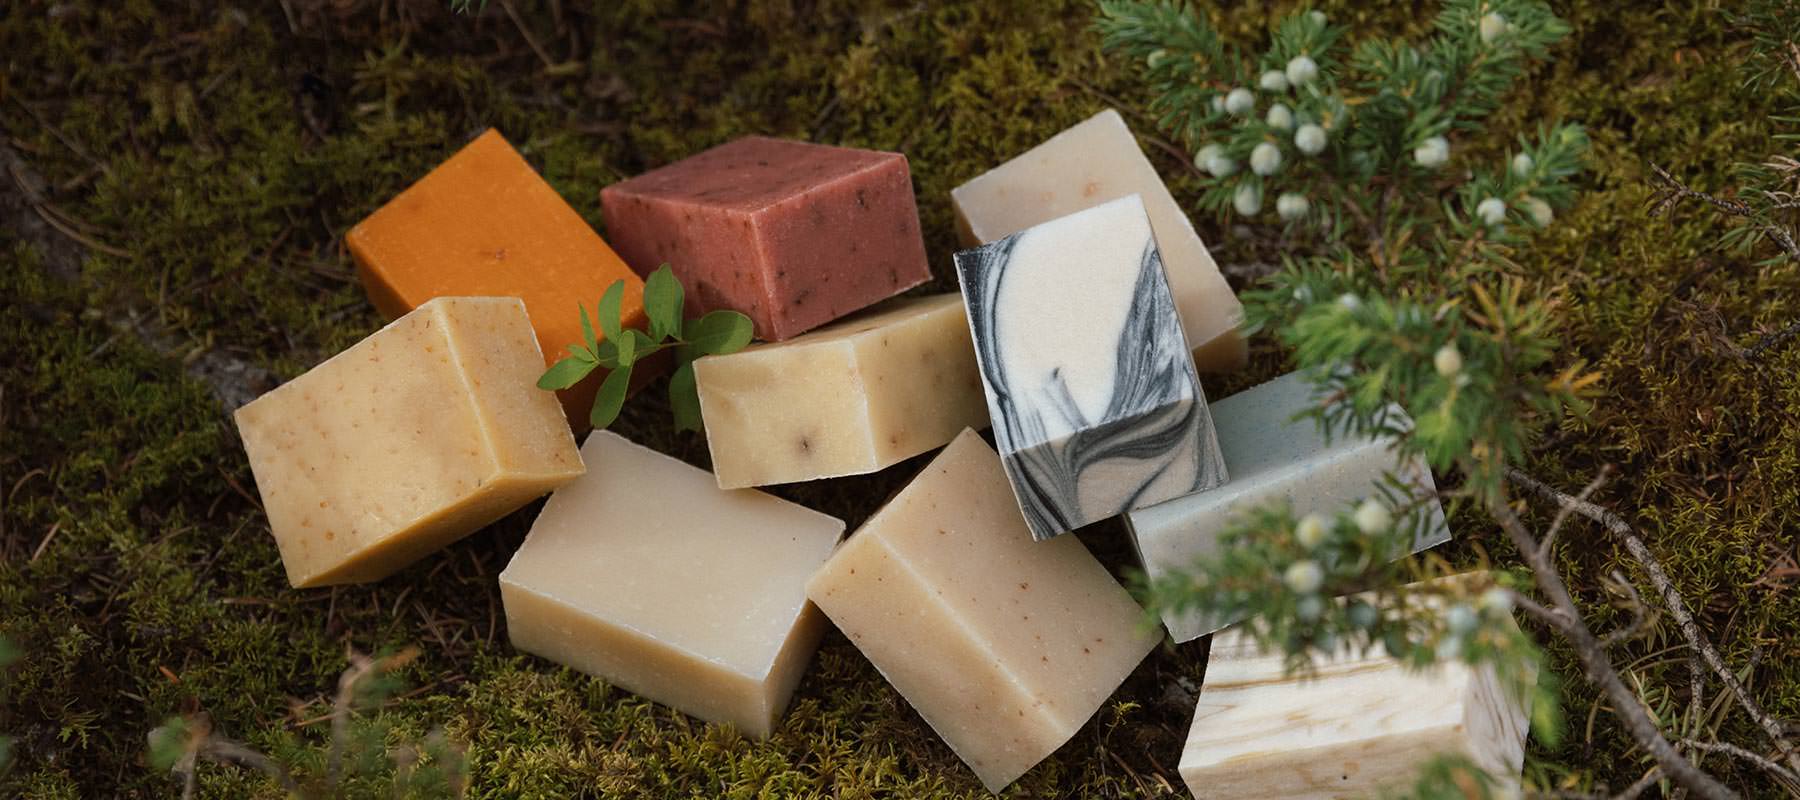 A collection of soap bars sitting in moss.